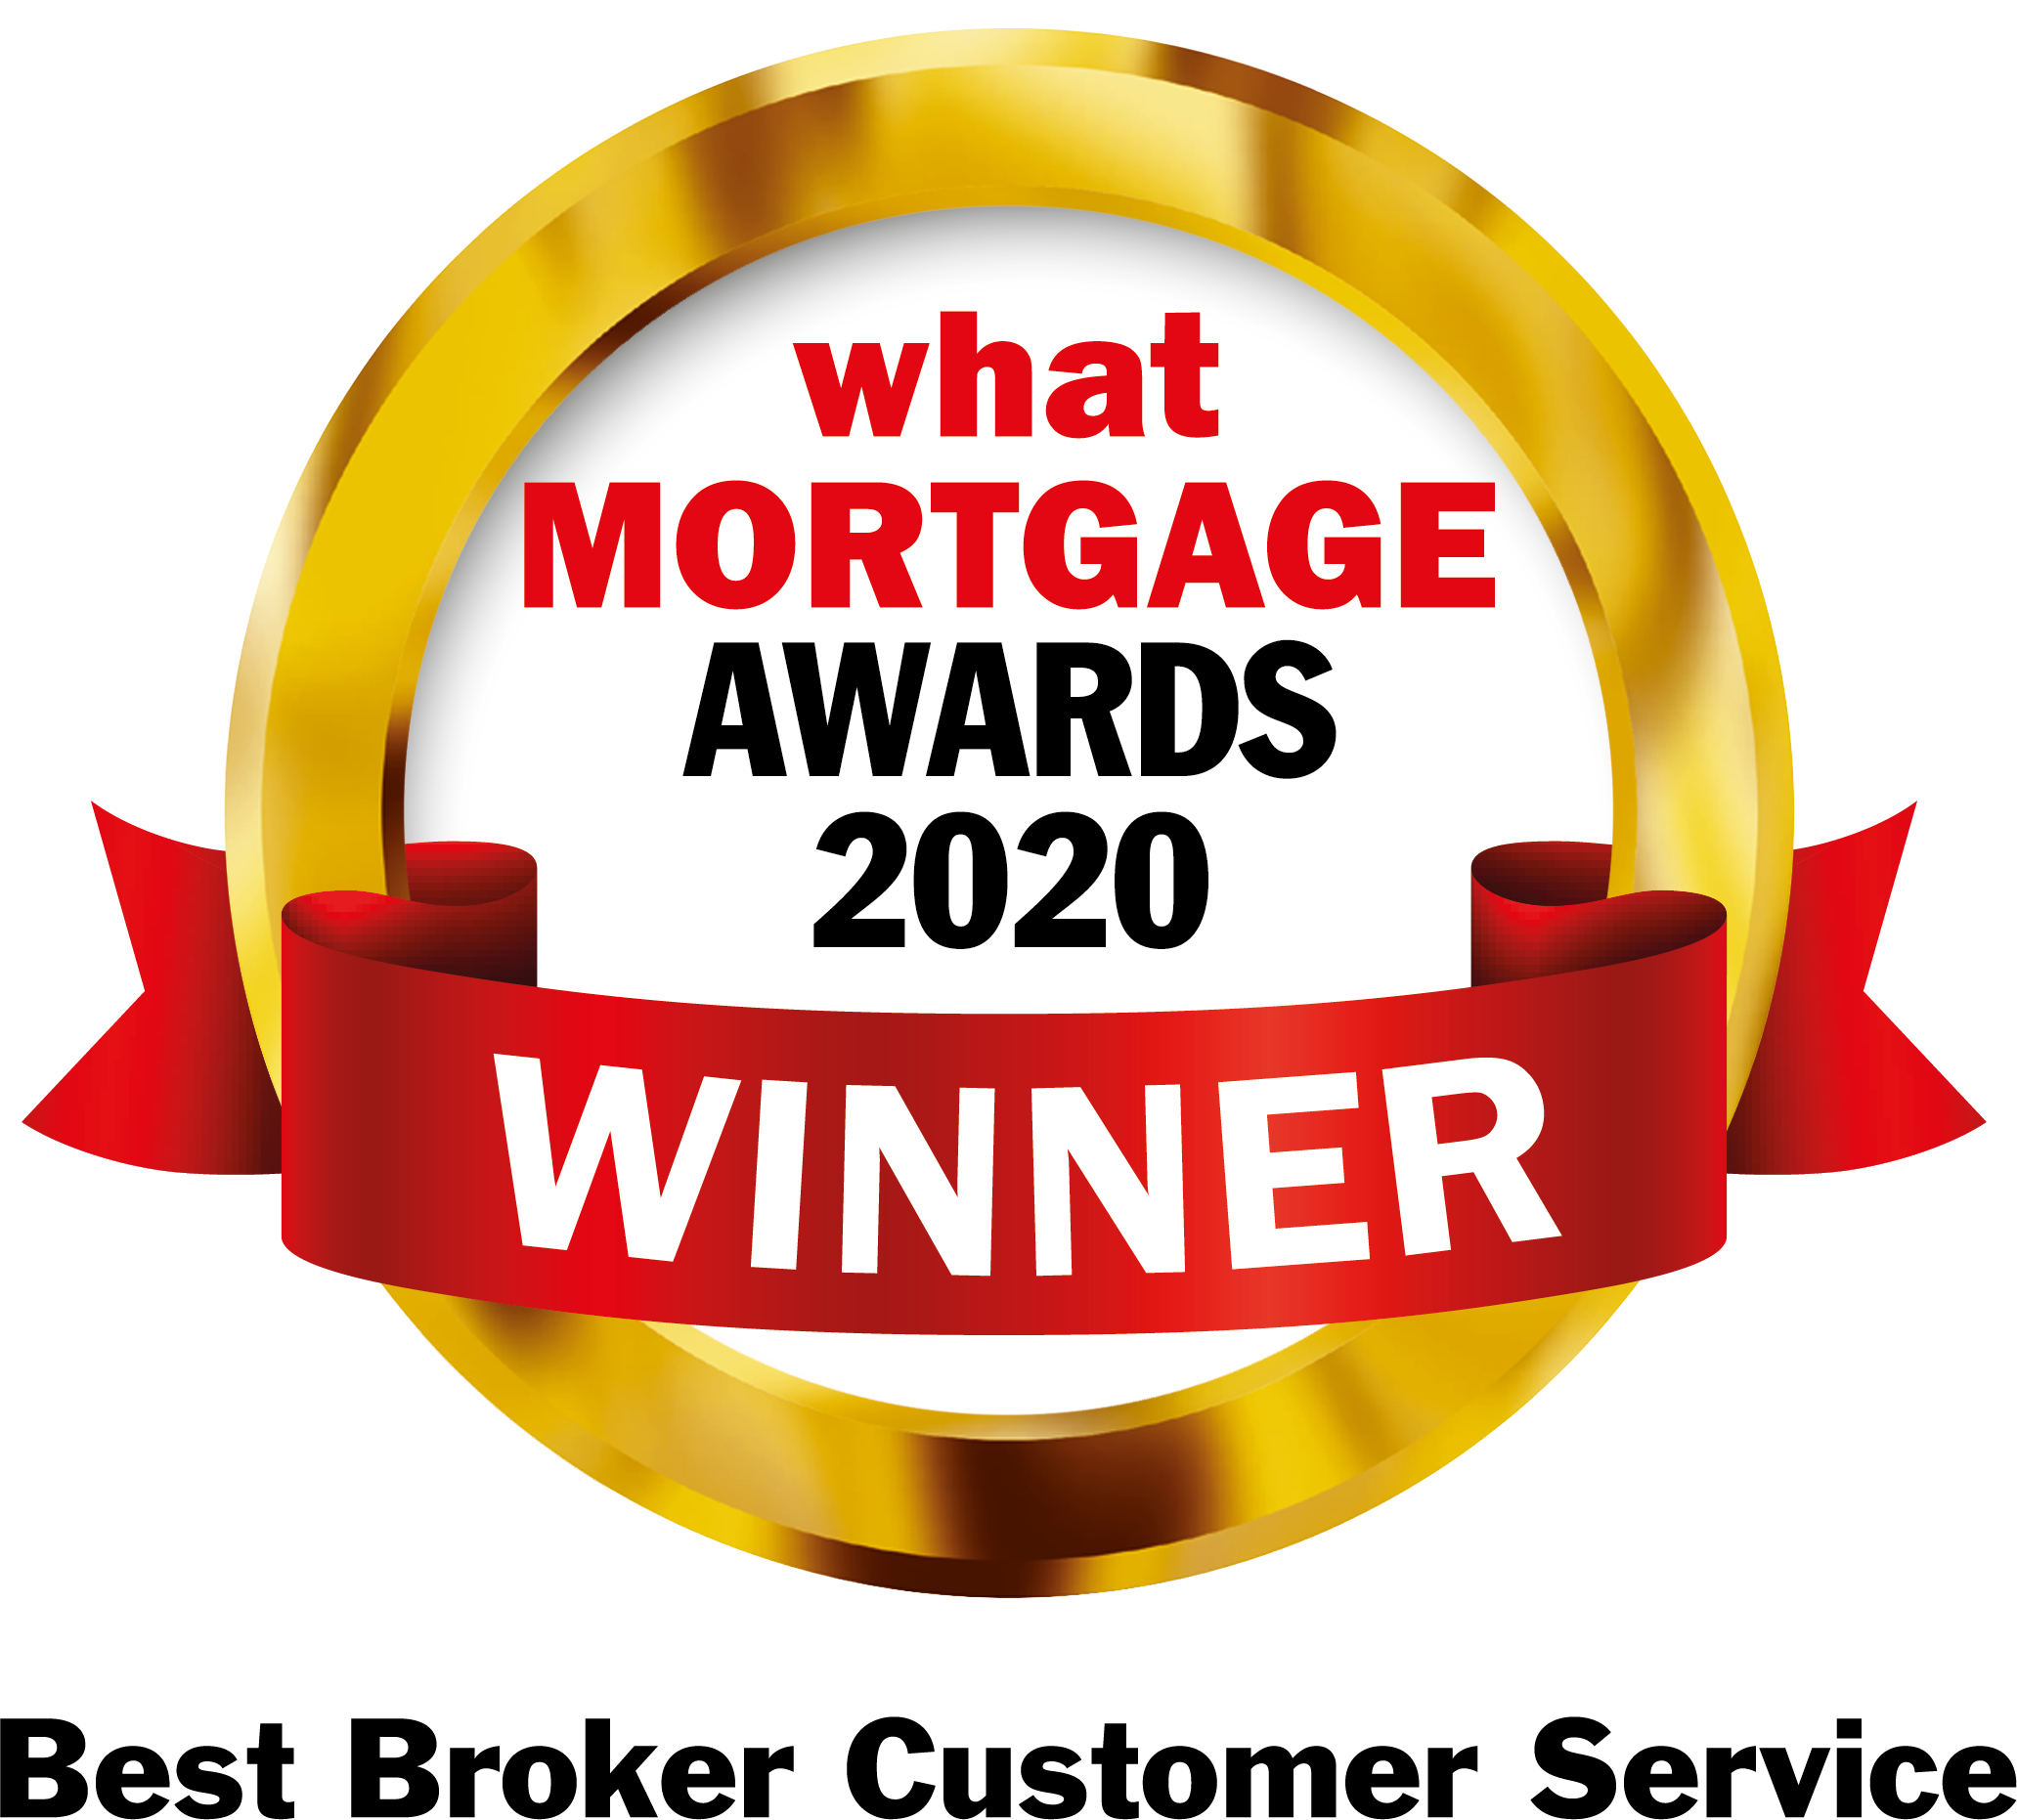 What Mortgage Awards 2020